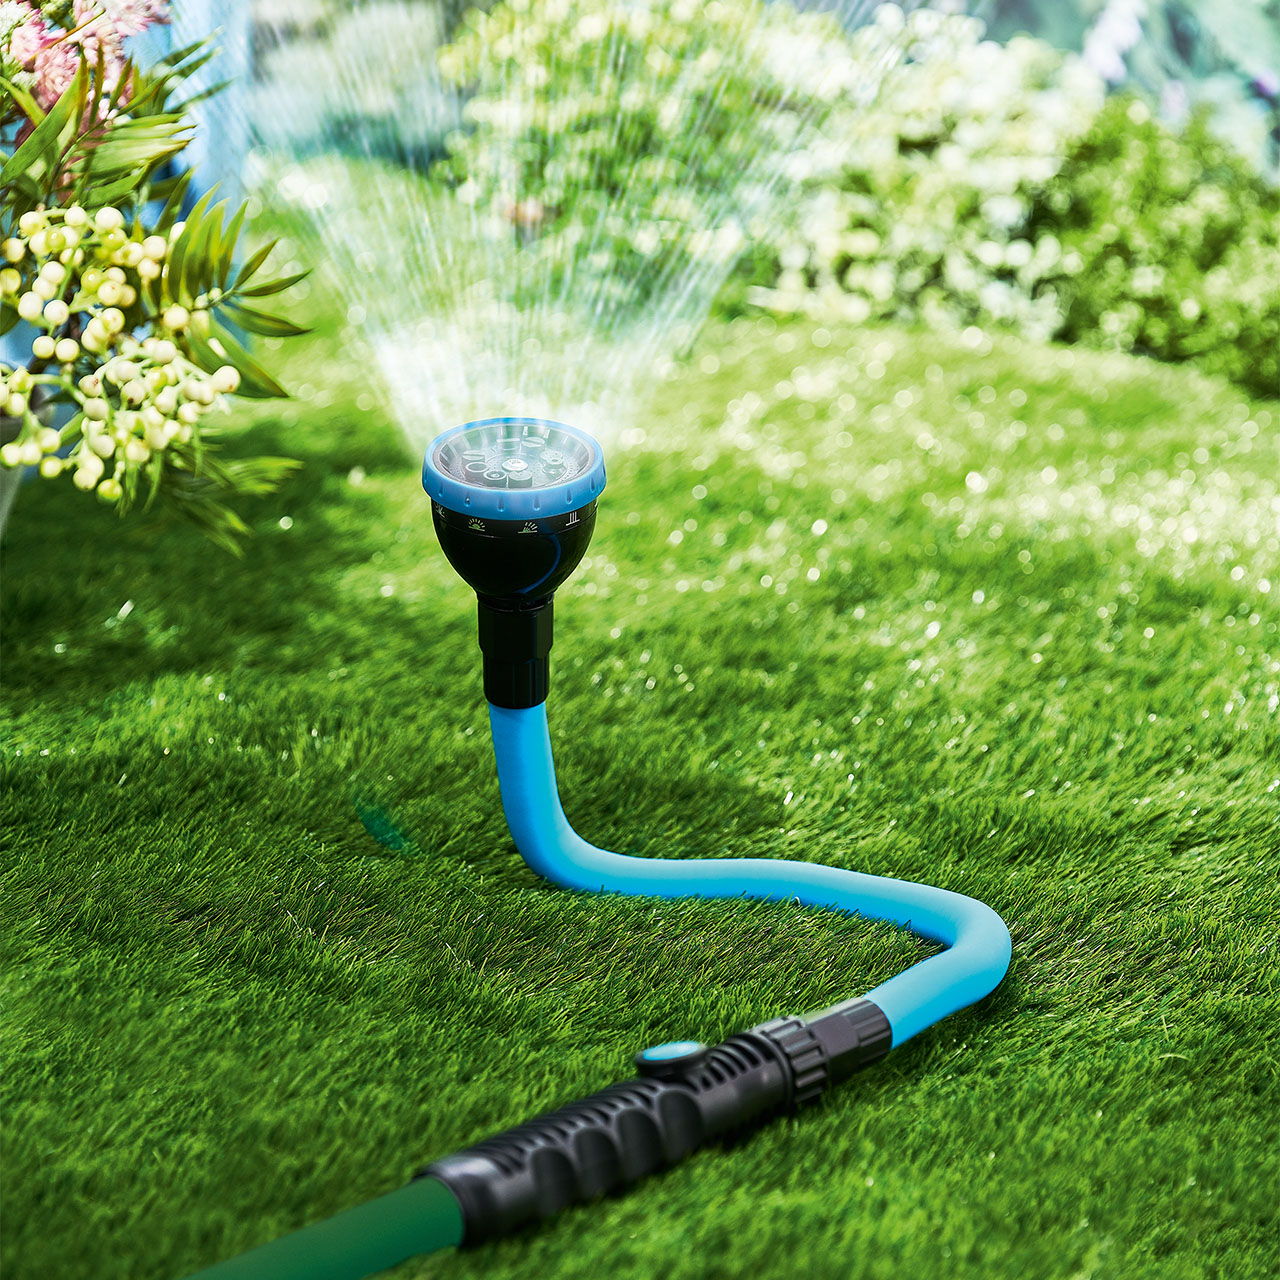 Flexible Watering Wand and Sprinkler